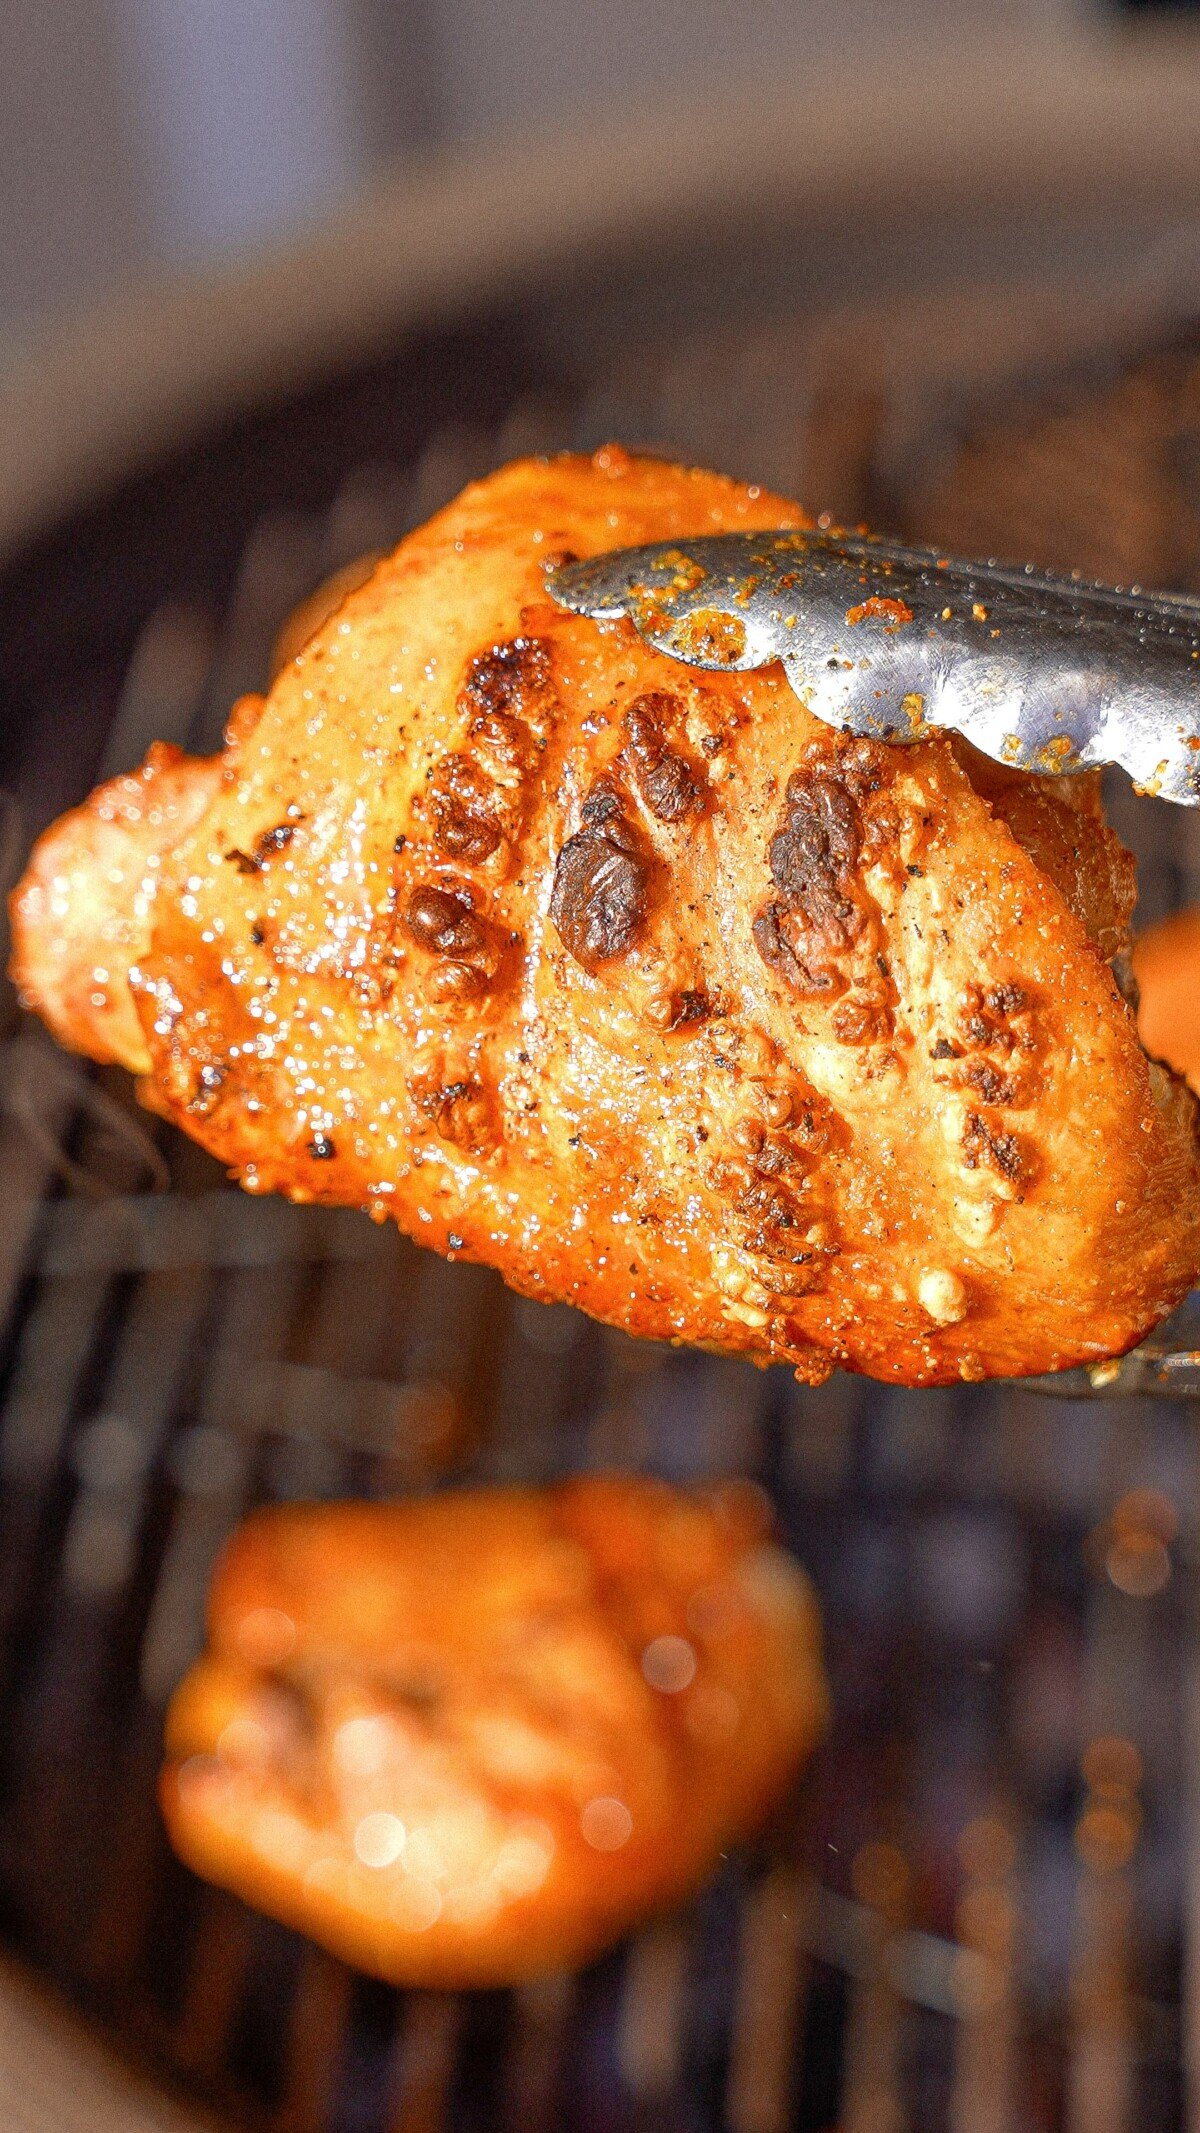 A cooked chicken thigh over a grill being held by tongs.